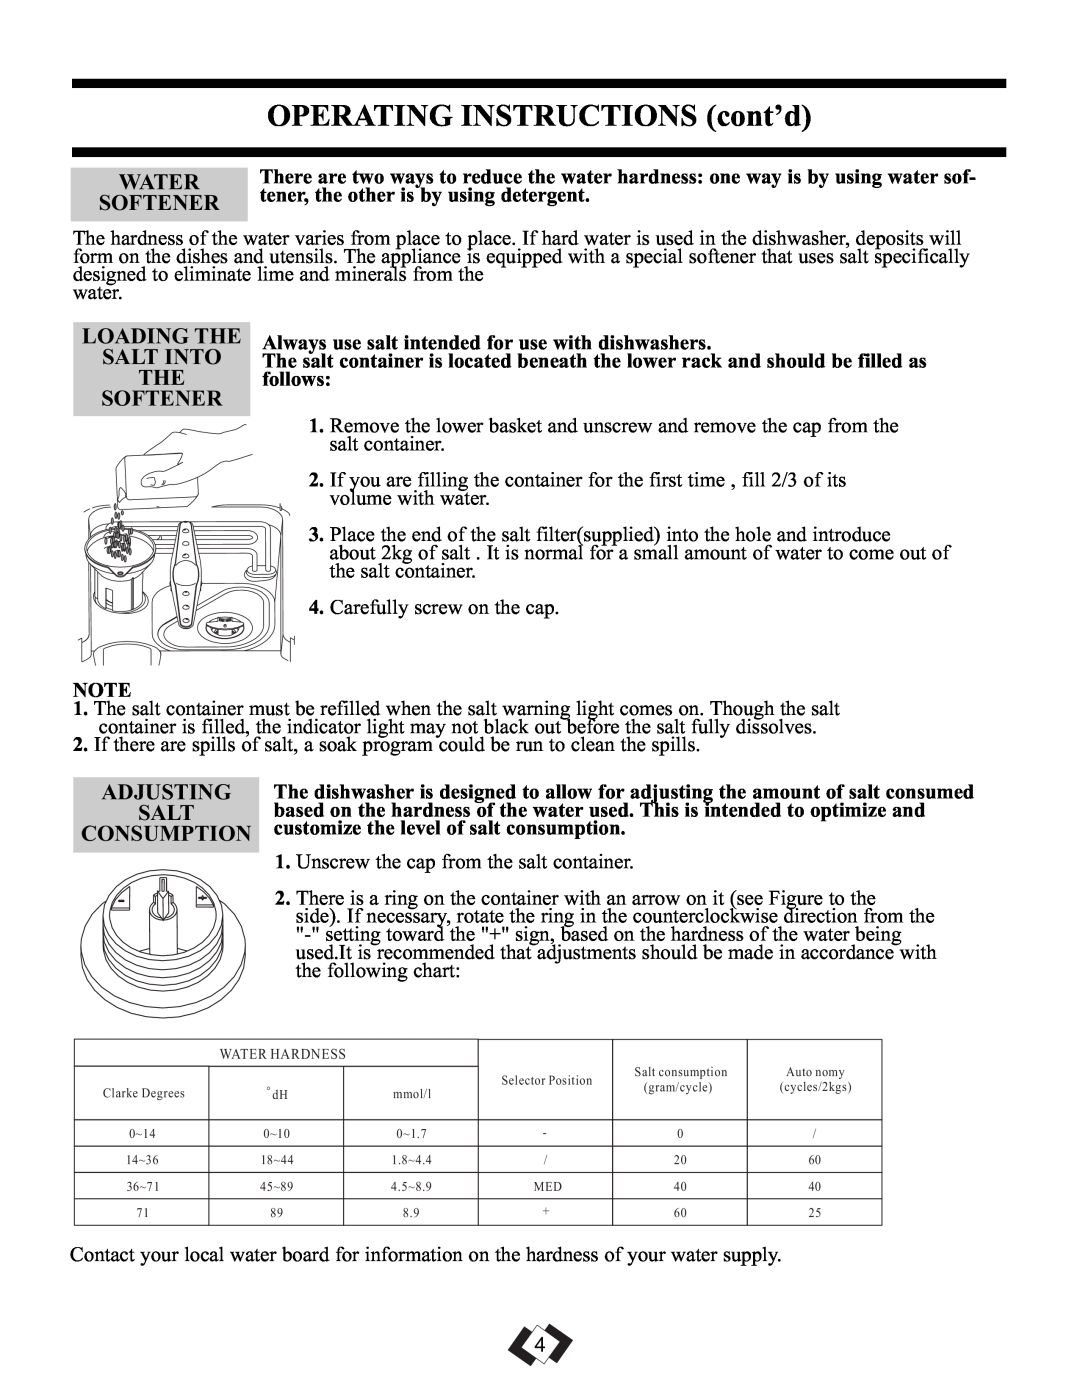 Danby DDW1899WP-1 OPERATING INSTRUCTIONS cont’d, Water, Loading The Salt Into The Softener, Adjusting, Consumption 